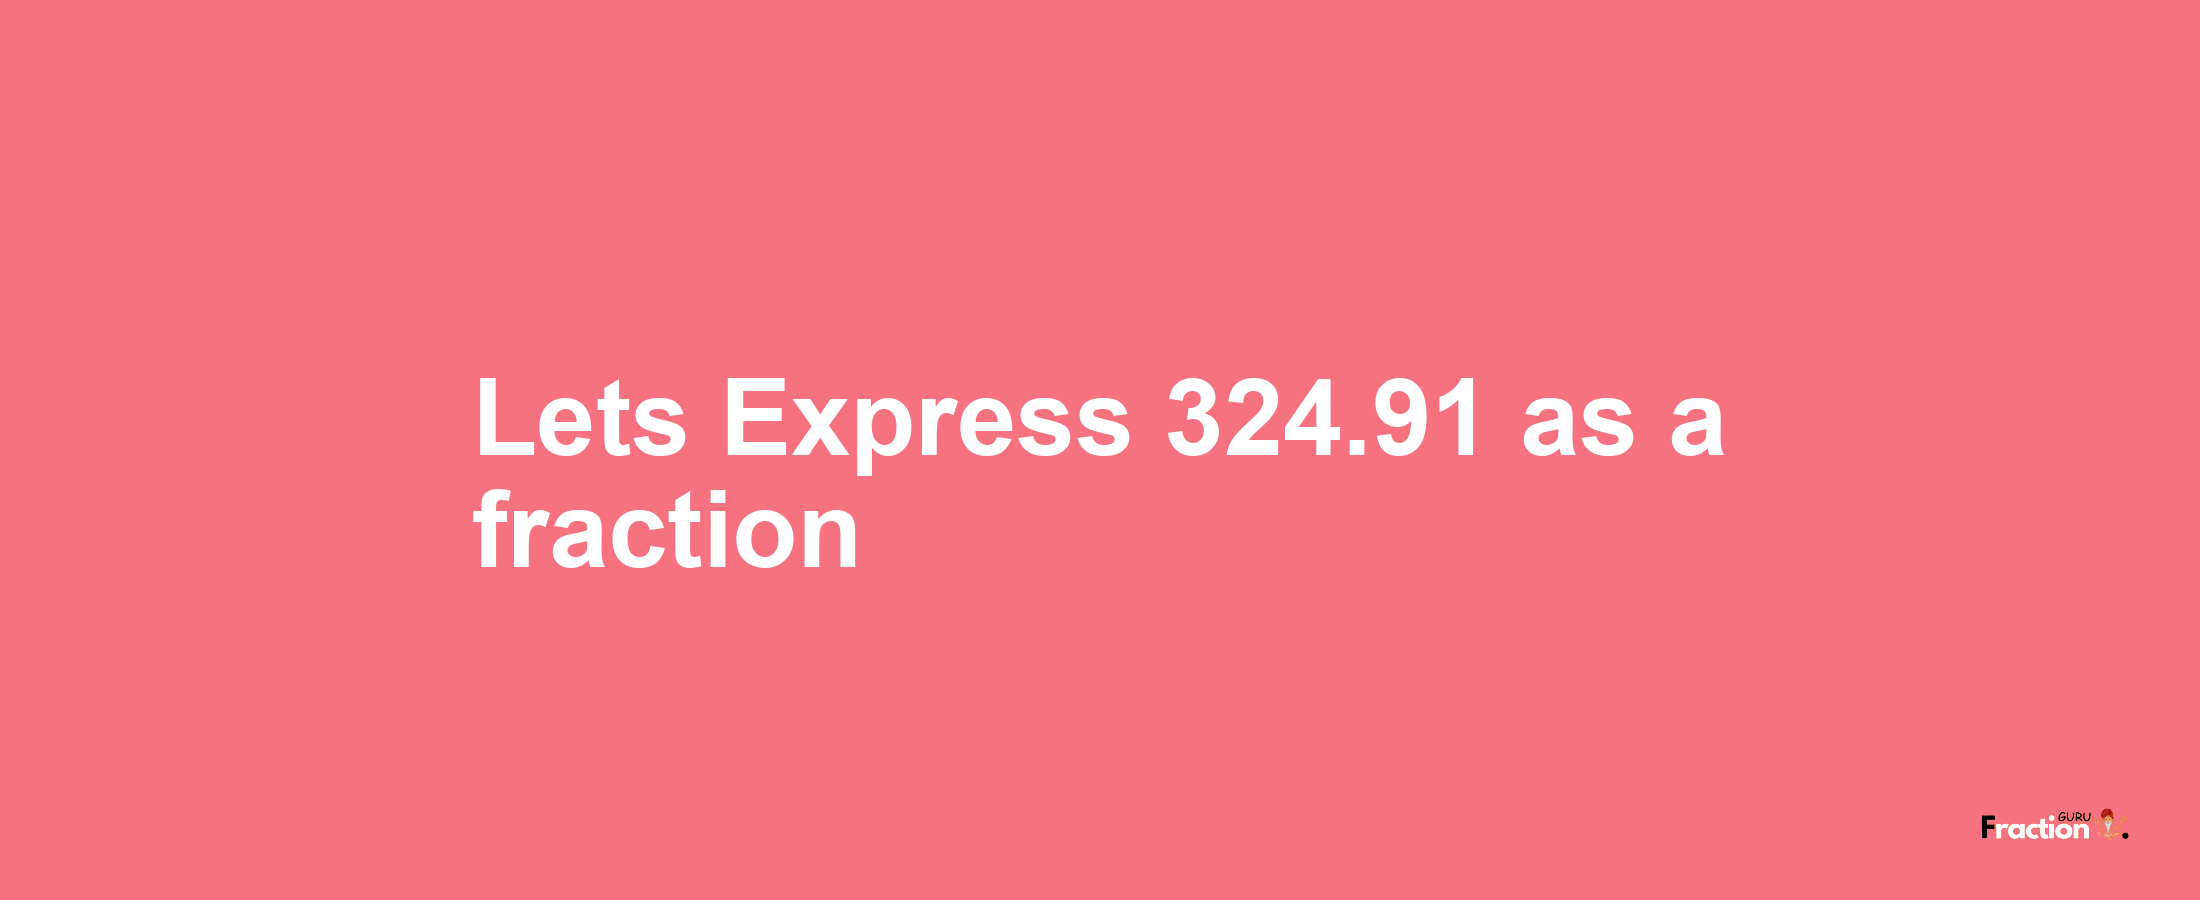 Lets Express 324.91 as afraction